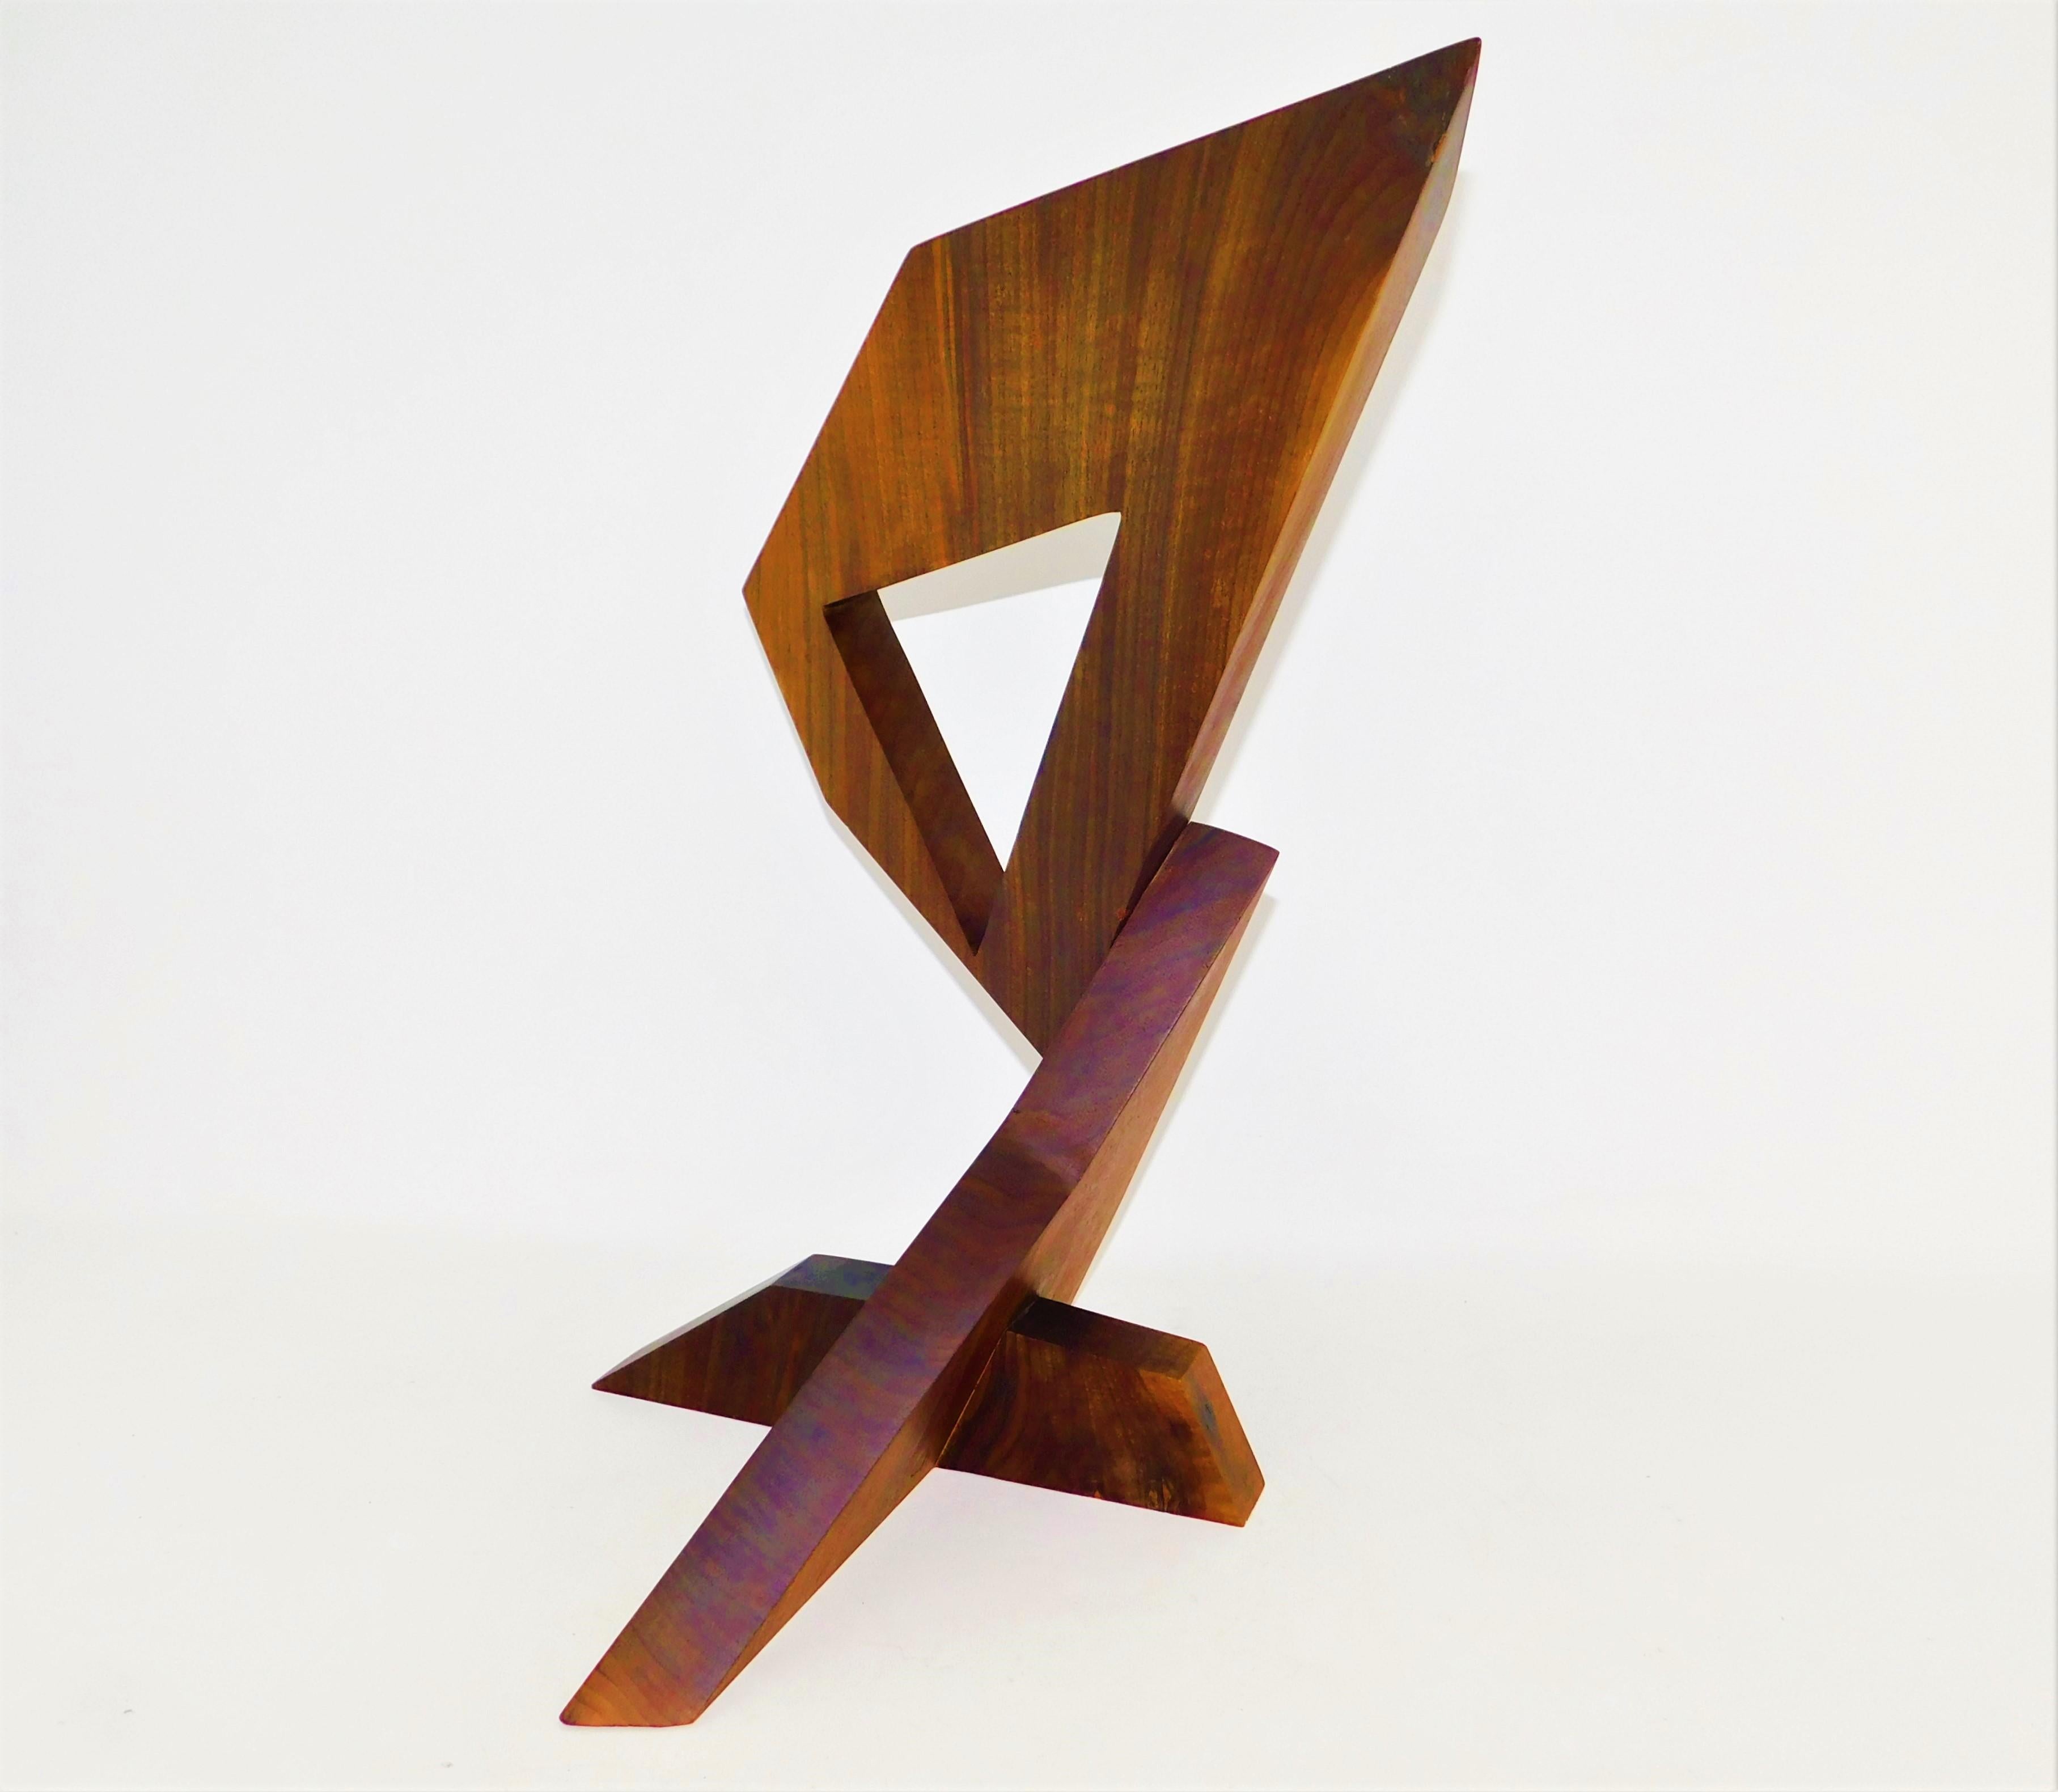 Modern Abstract Constructivist Walnut Wood Sculpture Signed Czeslaw Budny  In Excellent Condition For Sale In Hamilton, Ontario